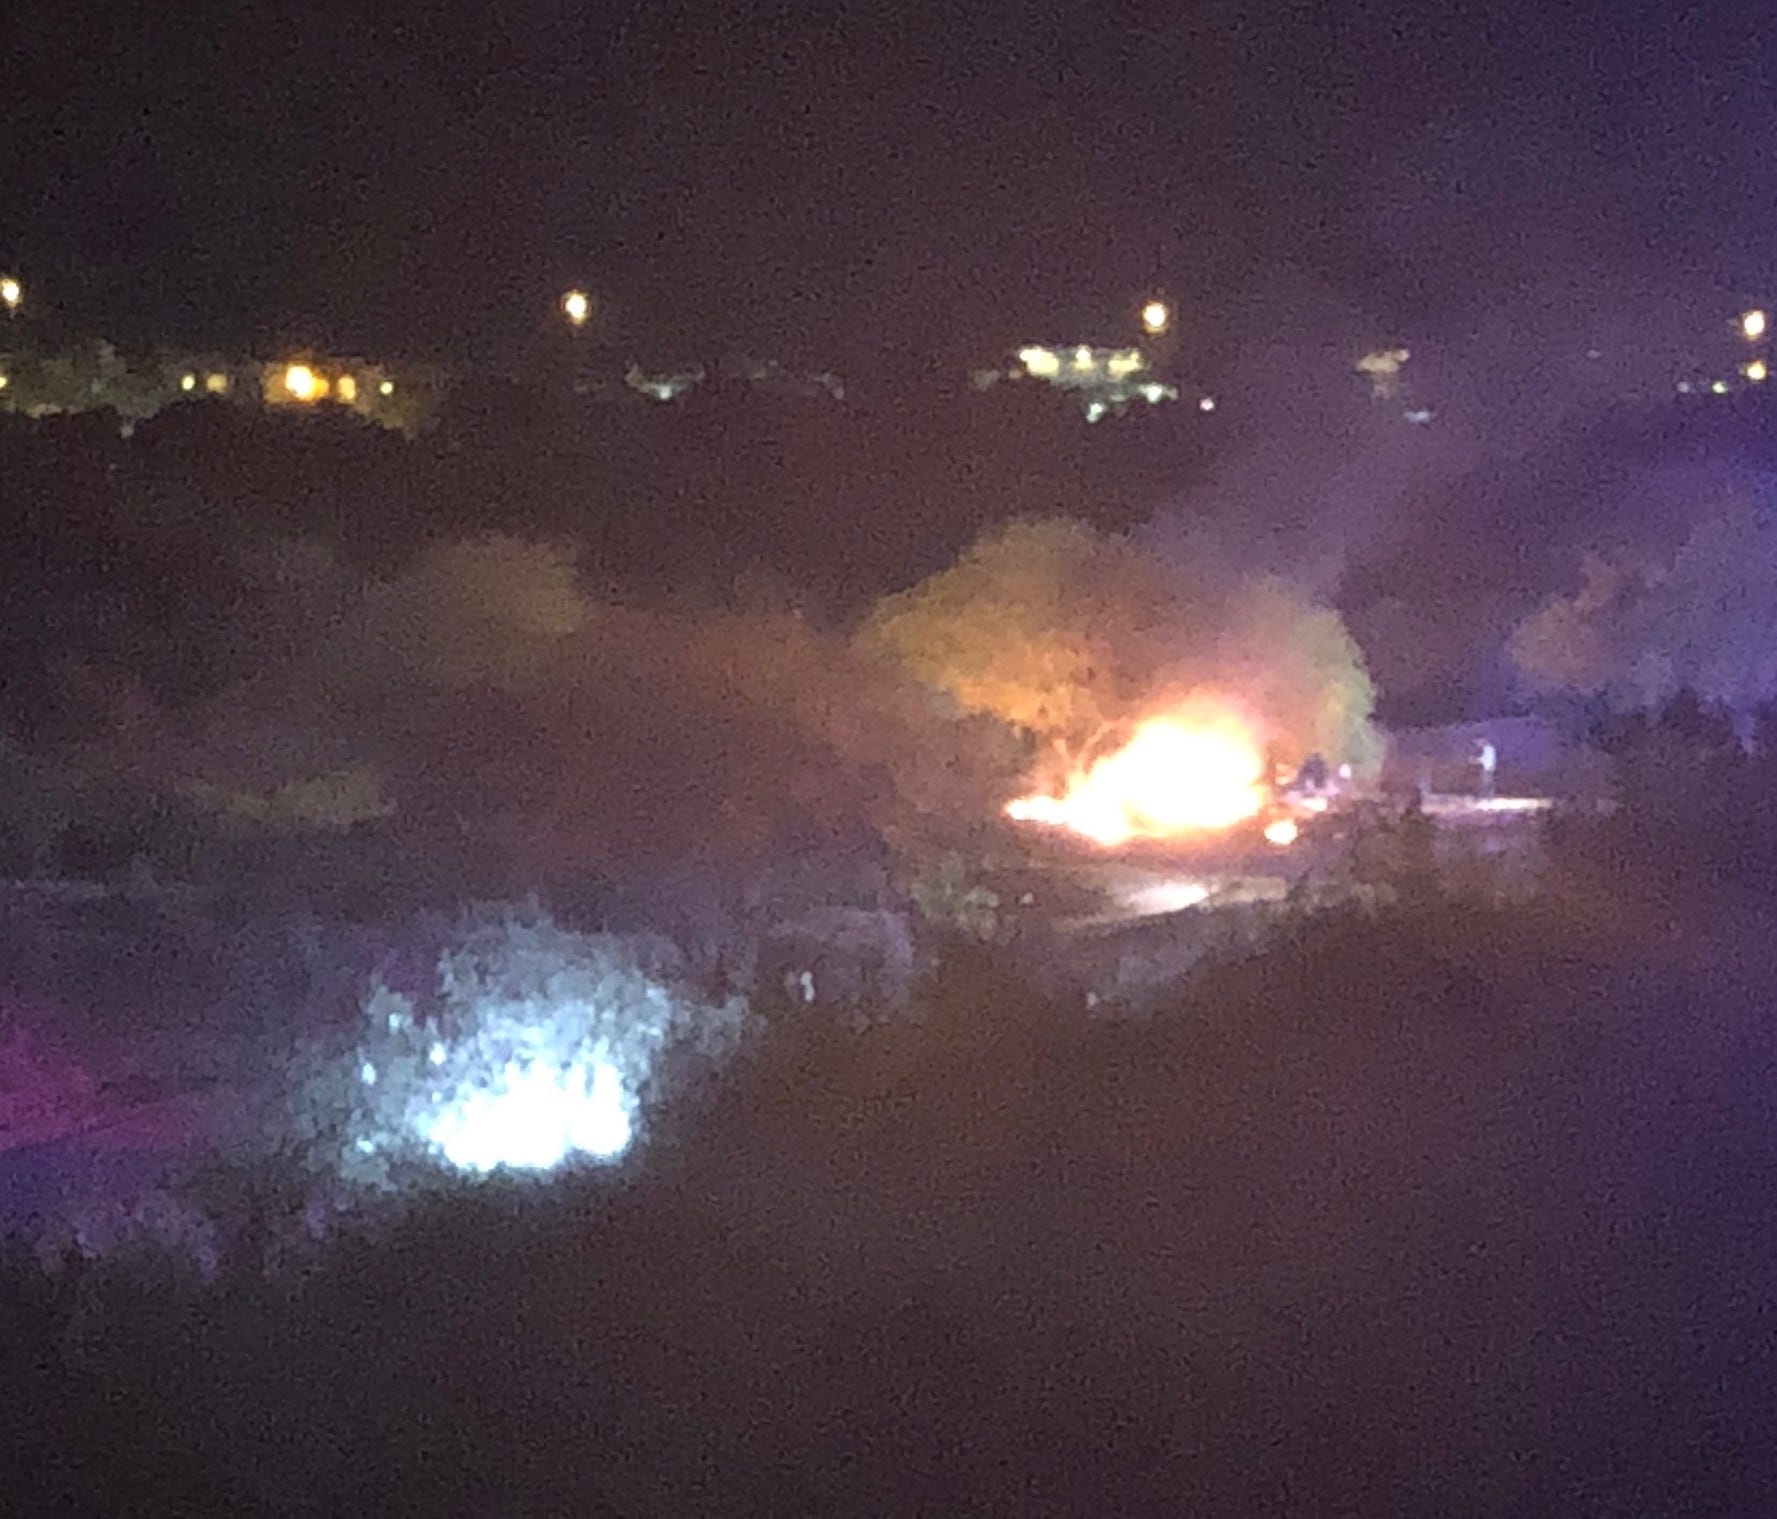 A small airplane crashed onto the TPC Scottsdale Champions Golf Course soon after takeoff from Scottsdale Airport Monday night.